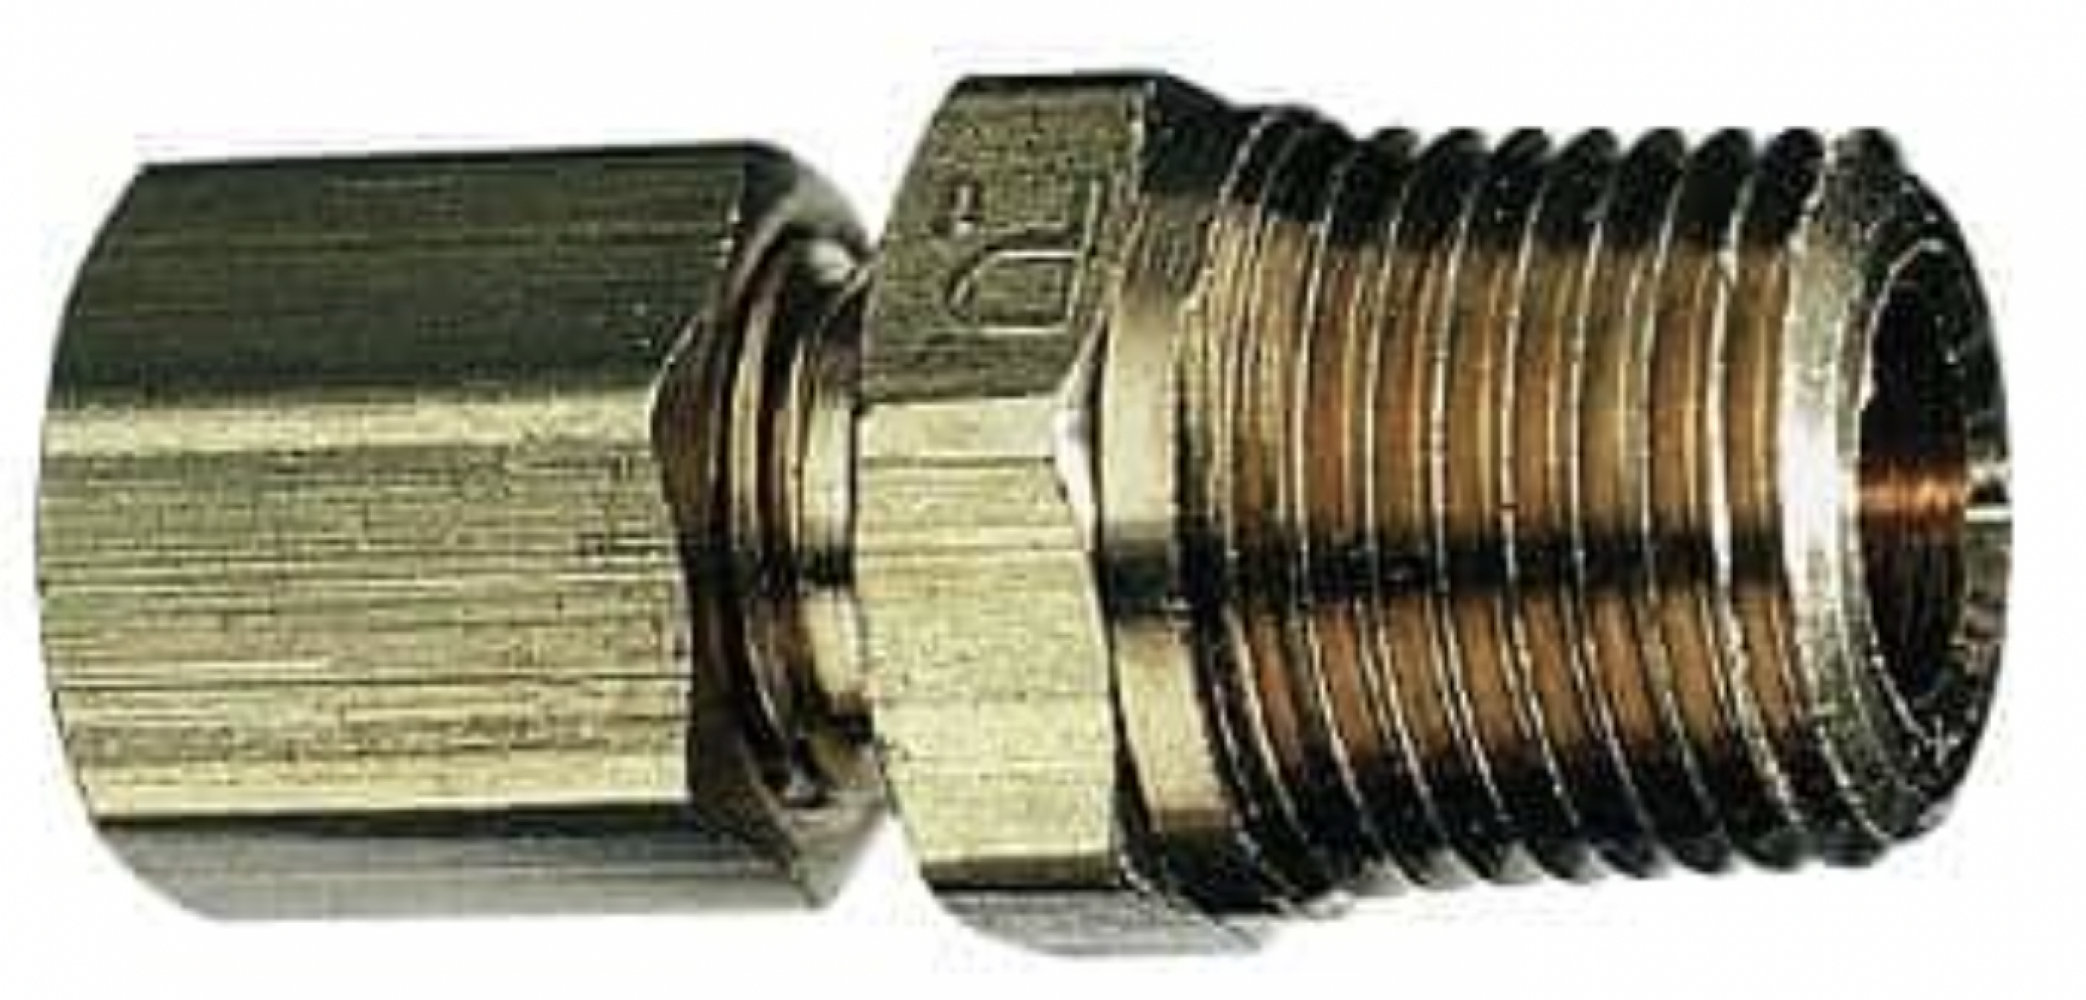 Plumbing N Parts 0.25 W x 0.375-in Brass Compression Union, Pack